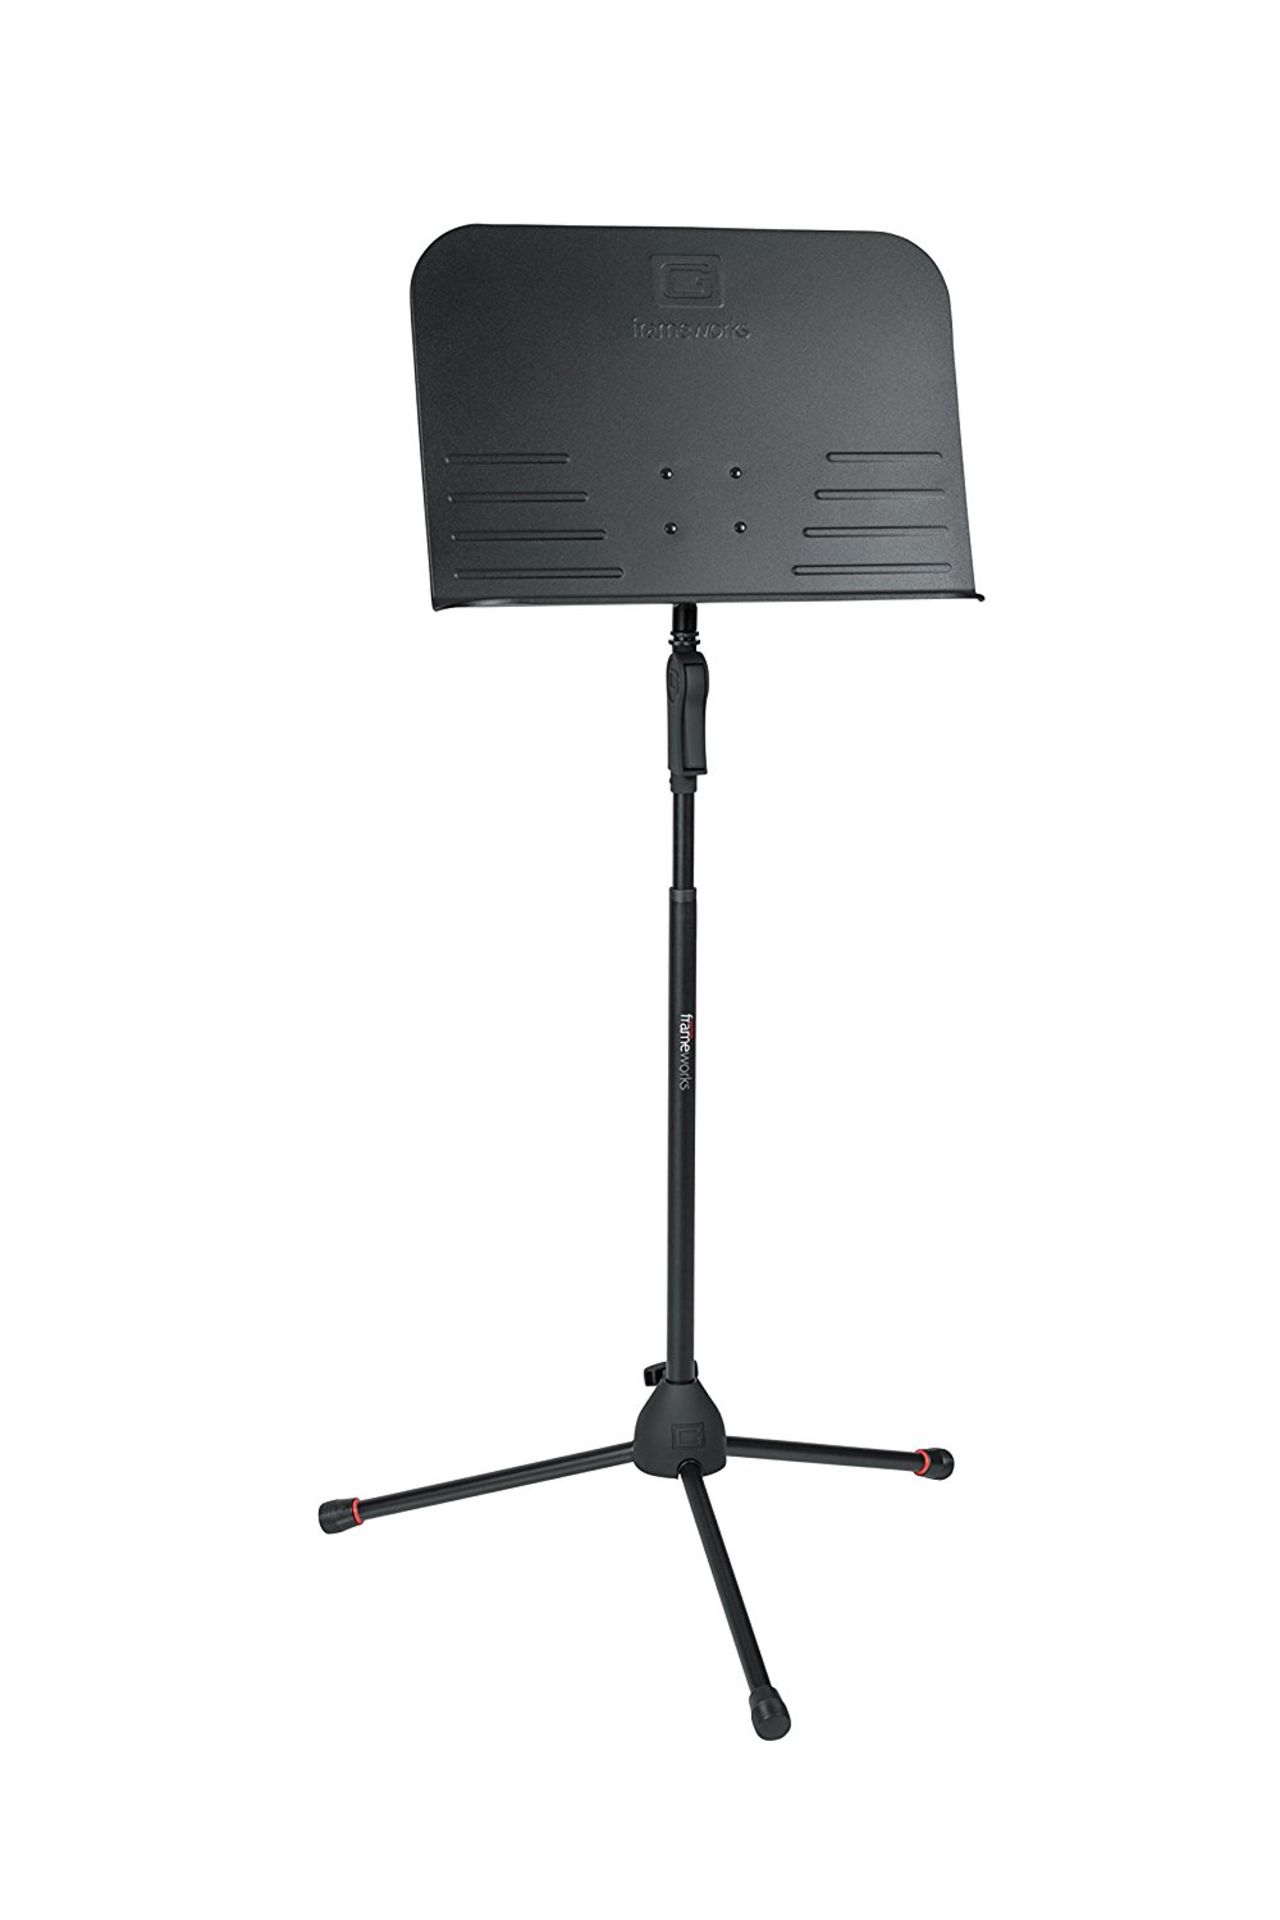 BRAND NEW Frameworks GFW-MUS-2000 Deluxe Sheet Music Stand